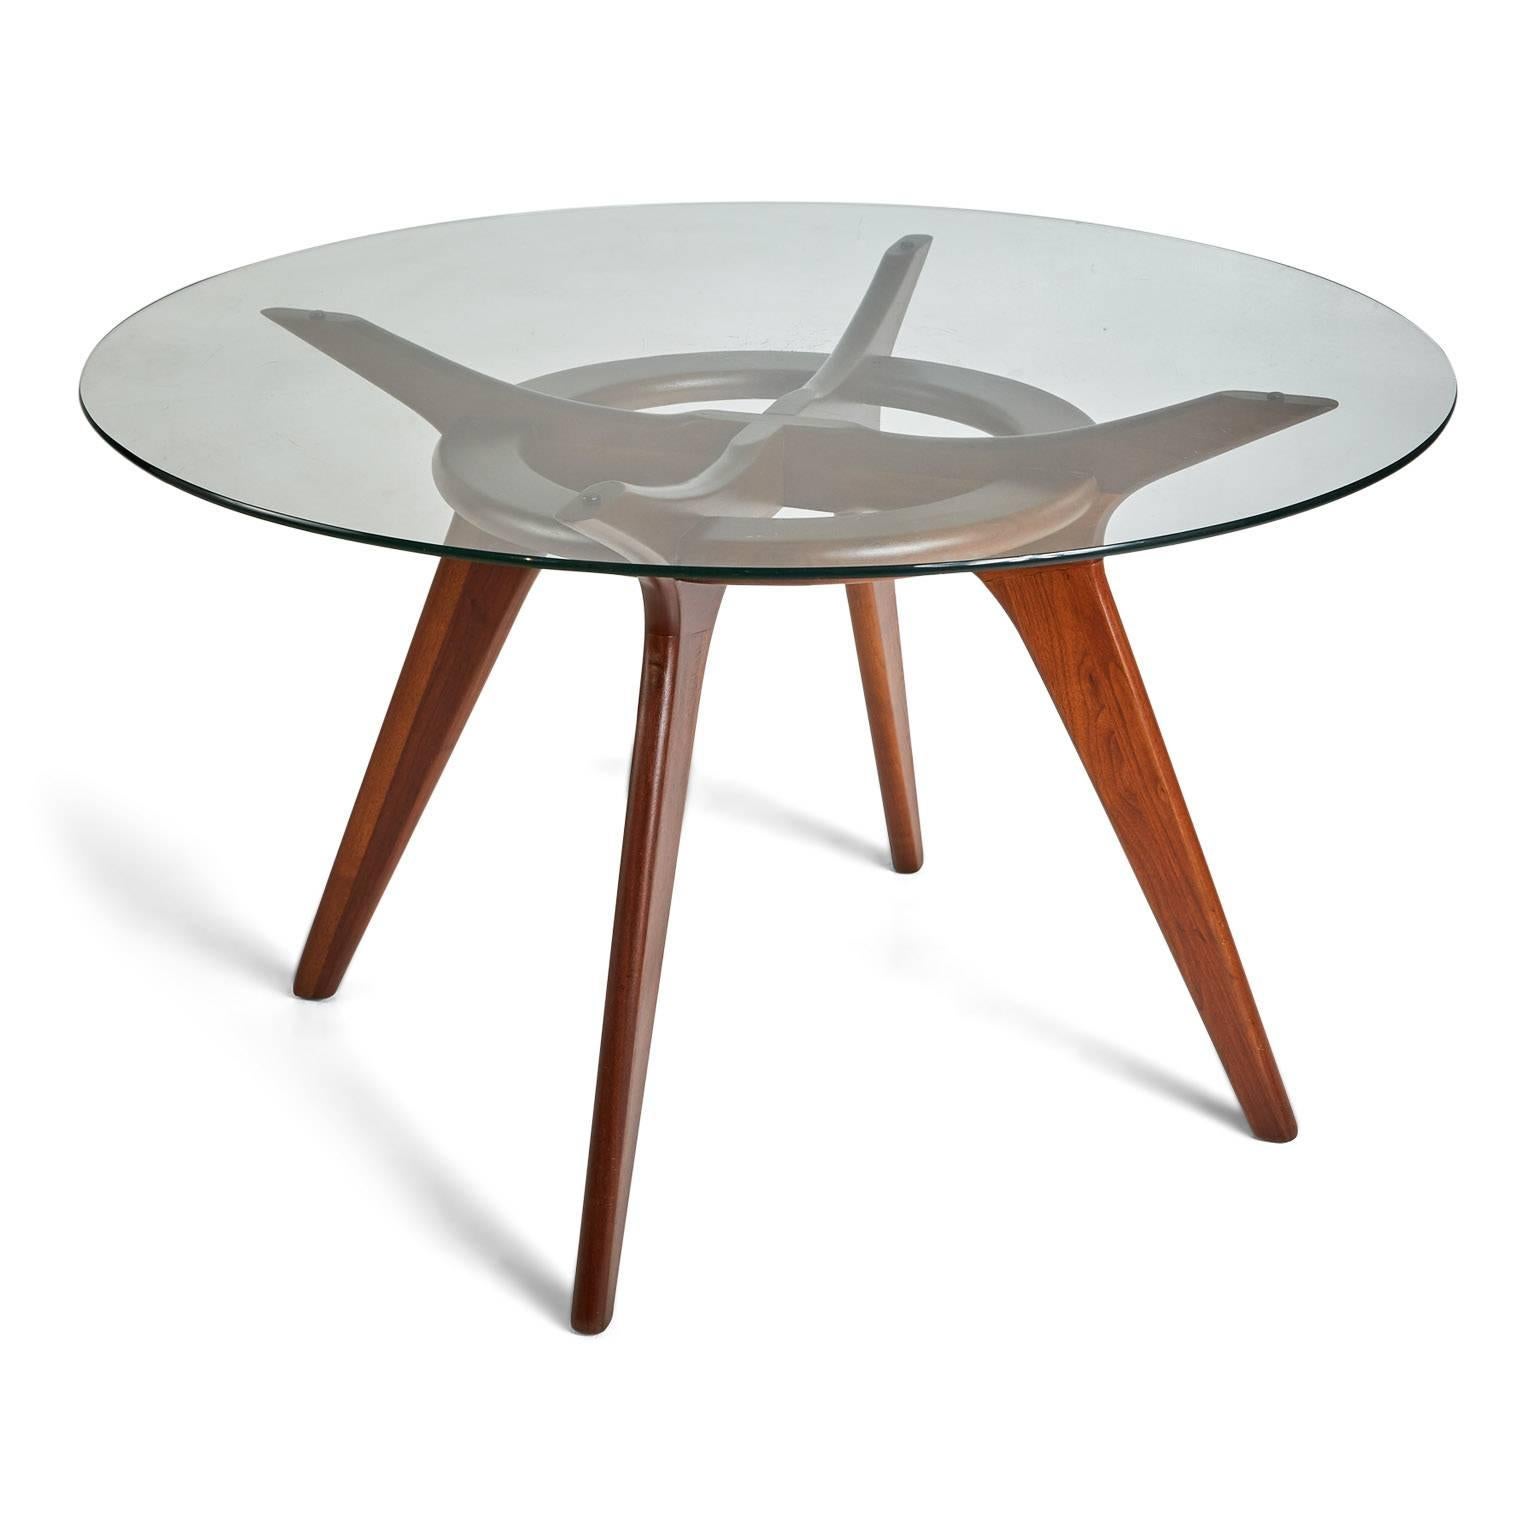 Mid-Century Modern Adrian Pearsall Compass Walnut Dining Table for Craft Associates